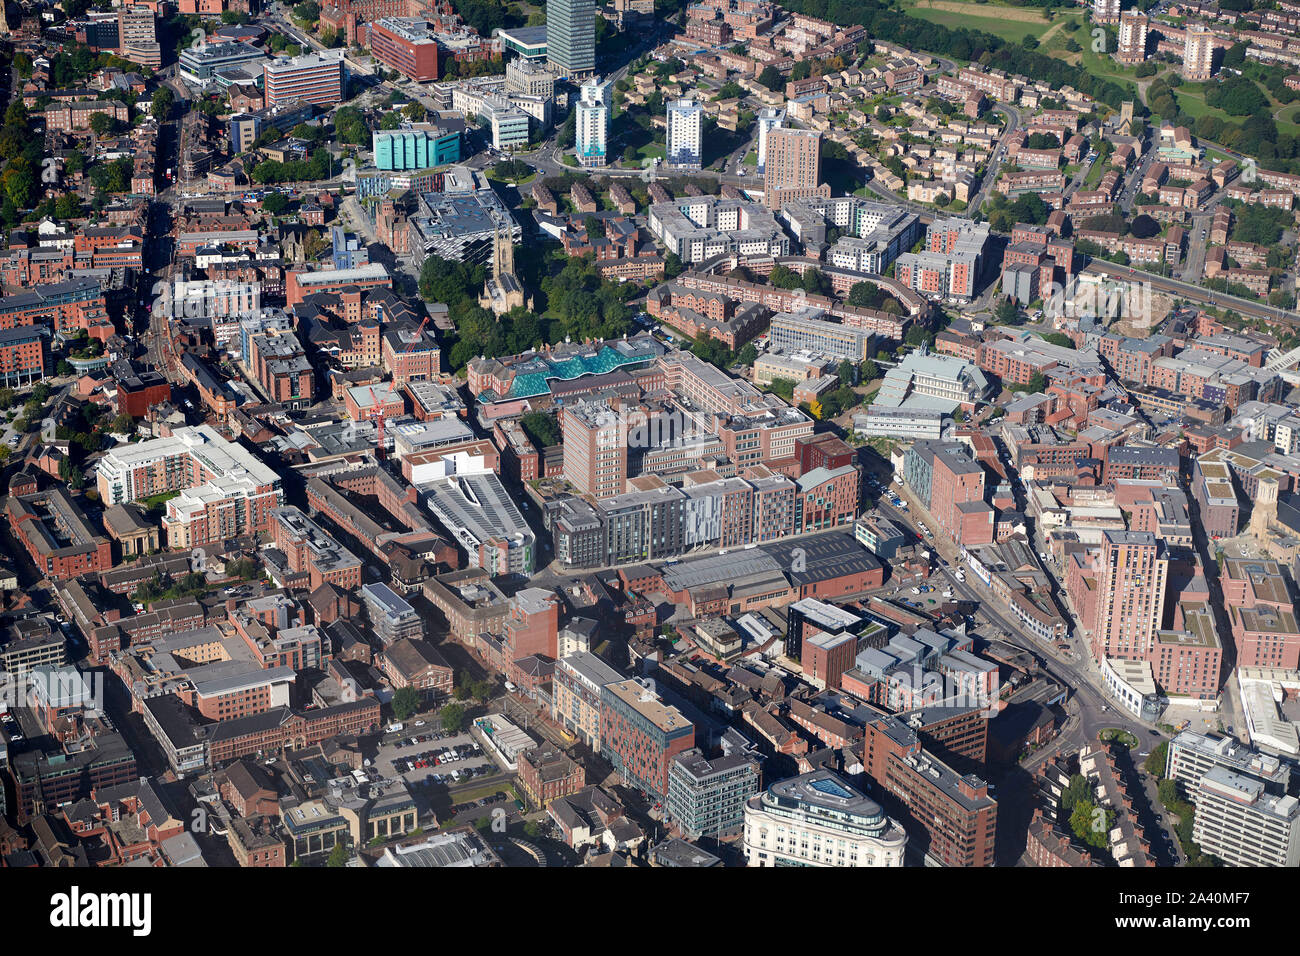 An aerial view of Sheffield city centre, South Yorkshire, Northern England, UK Stock Photo